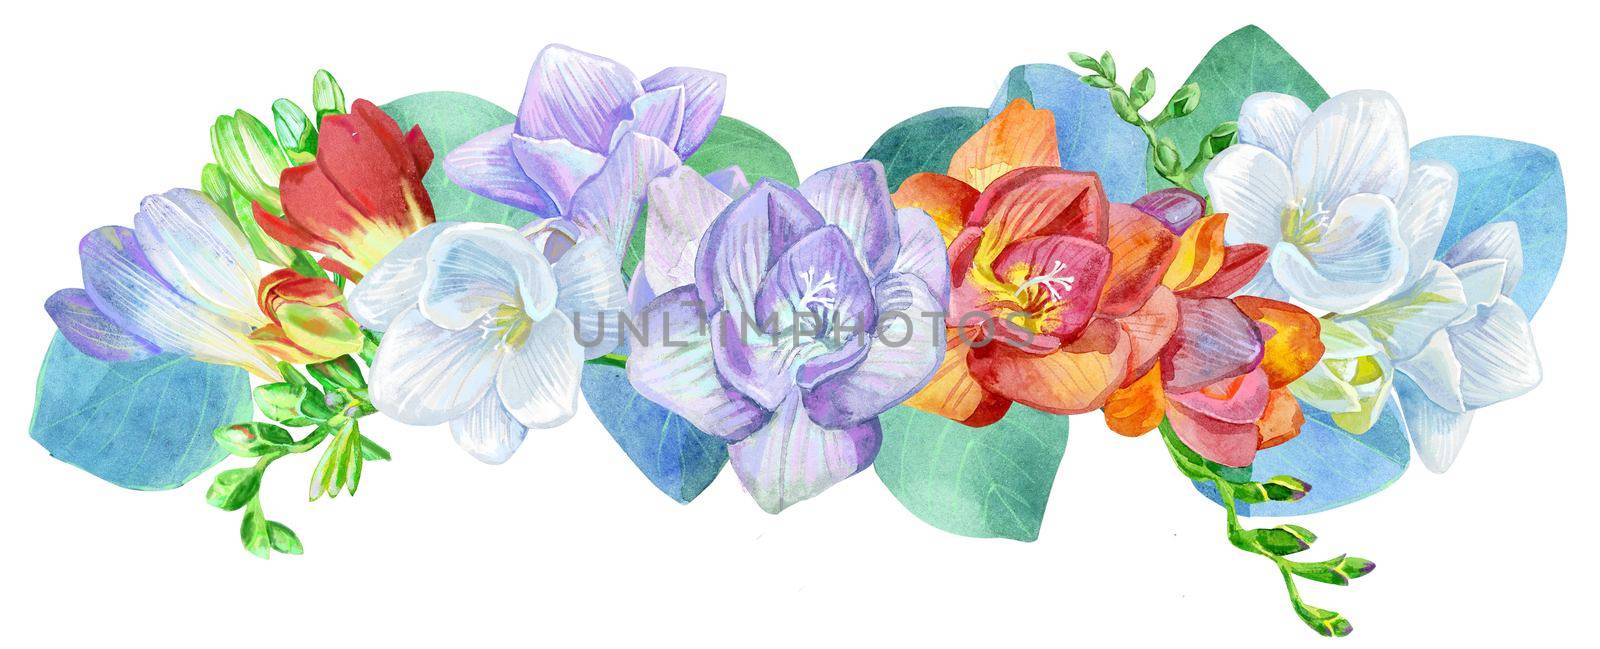 Hand drawn border of freesia and eucalyptus. Design element for wedding invitations, cards